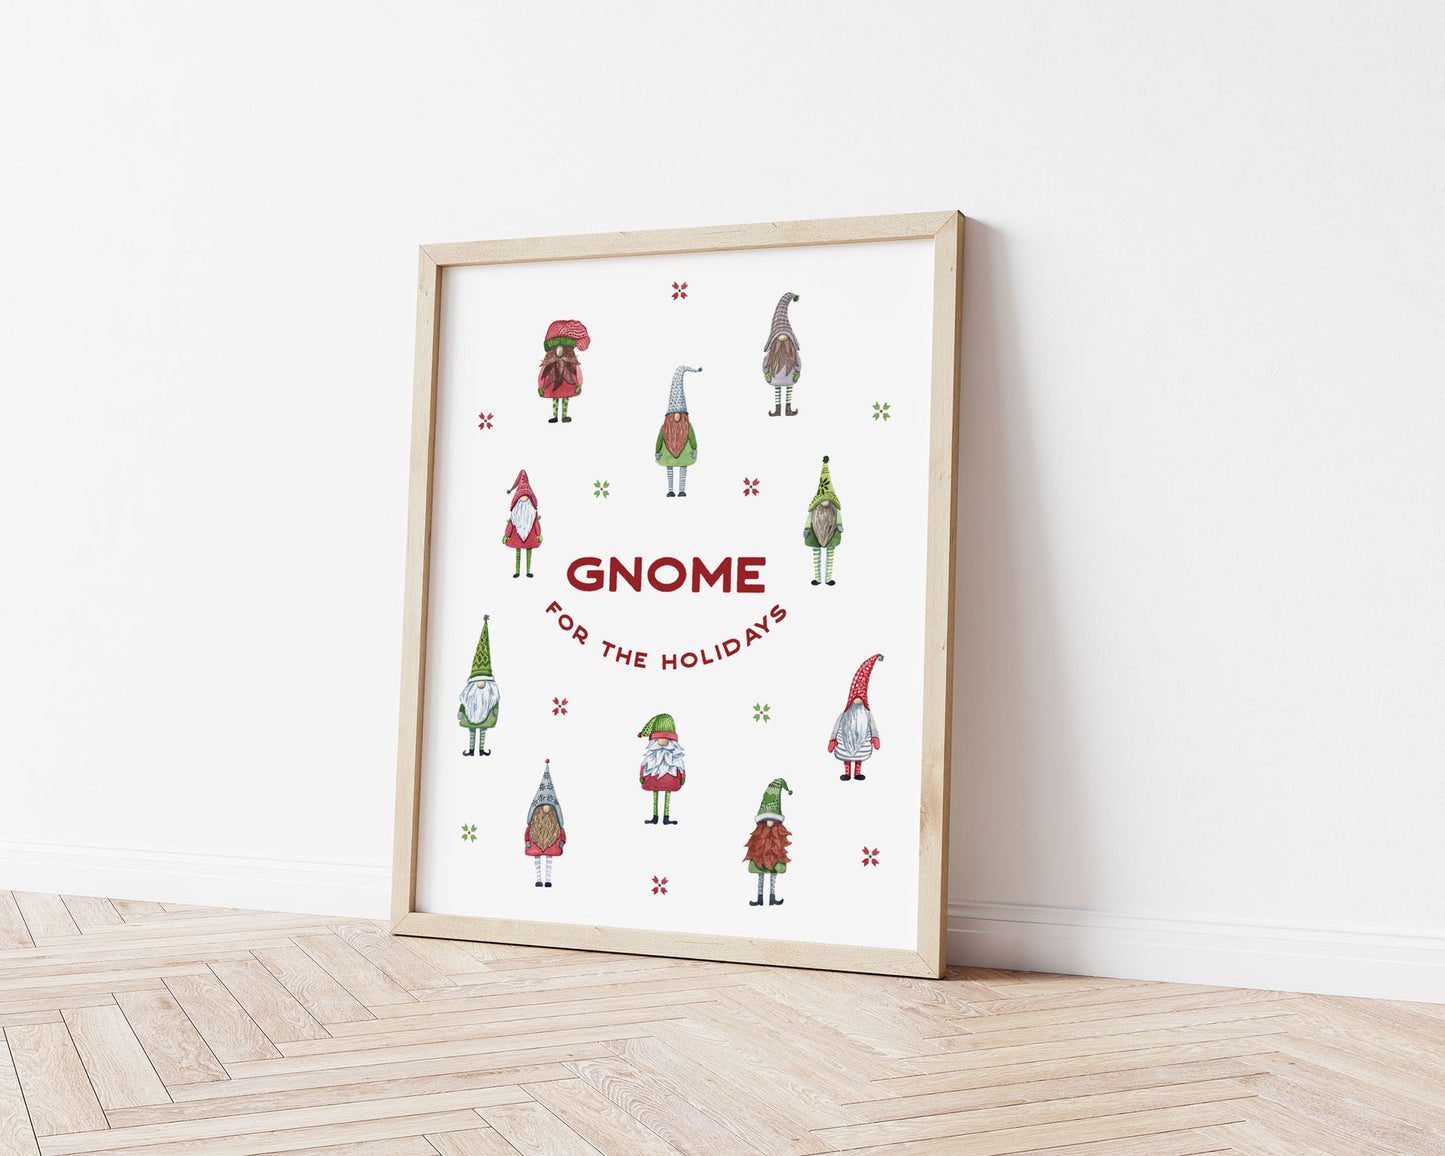 Gnome Home for the Holidays